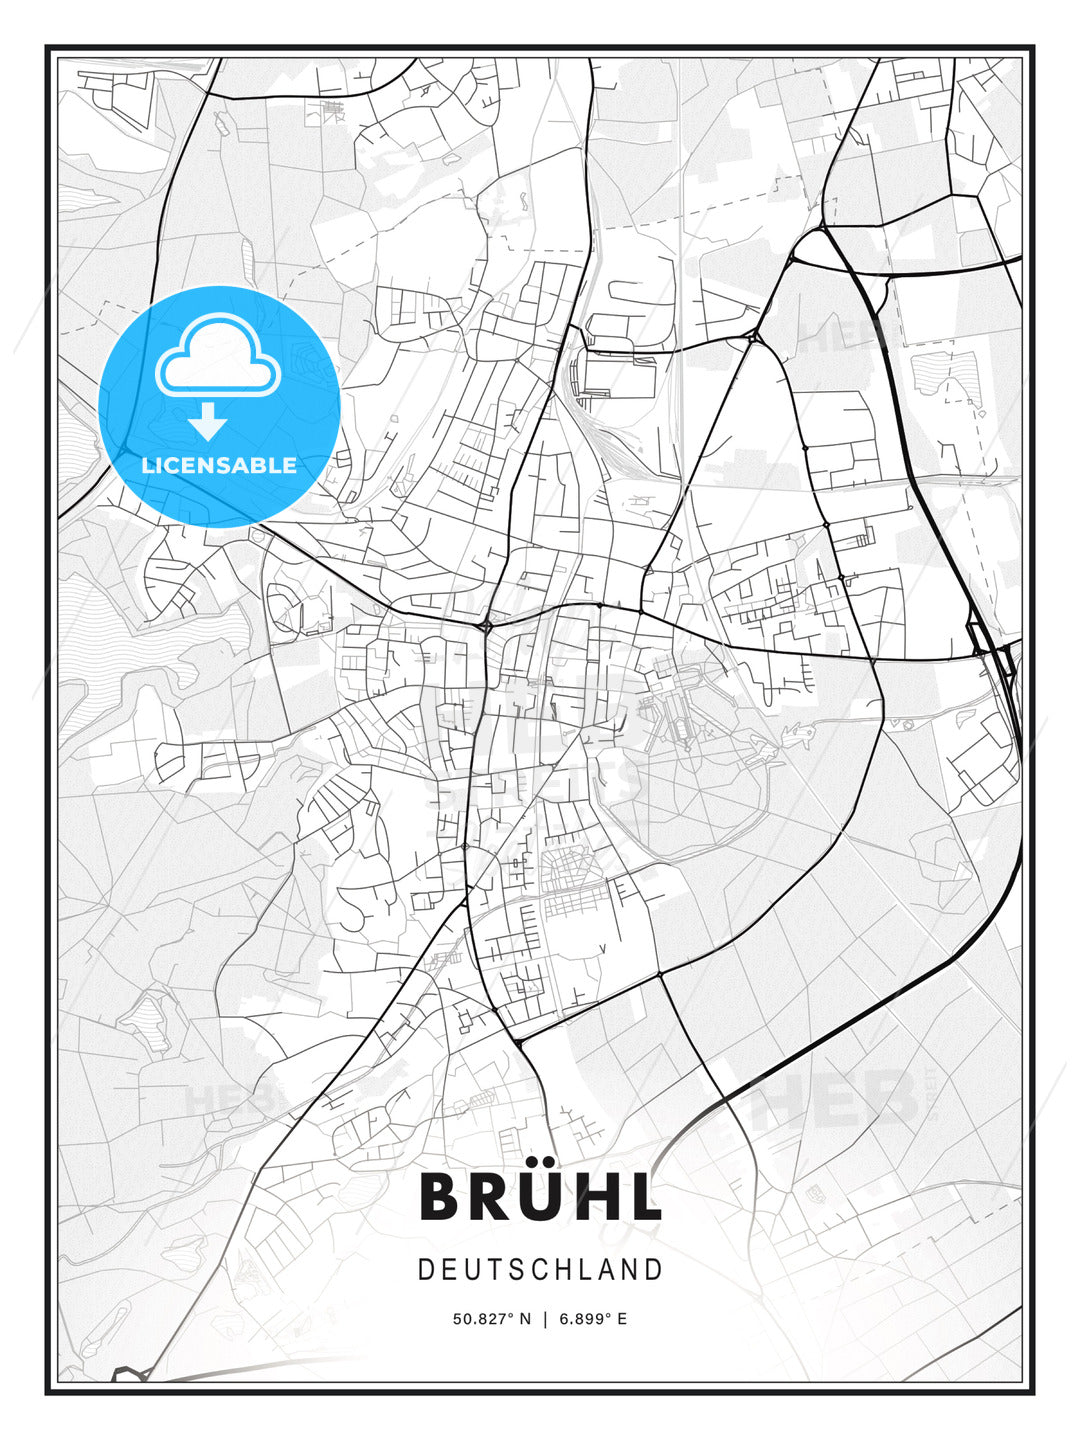 BRÜHL / Bruhl, Germany, Modern Print Template in Various Formats - HEBSTREITS Sketches